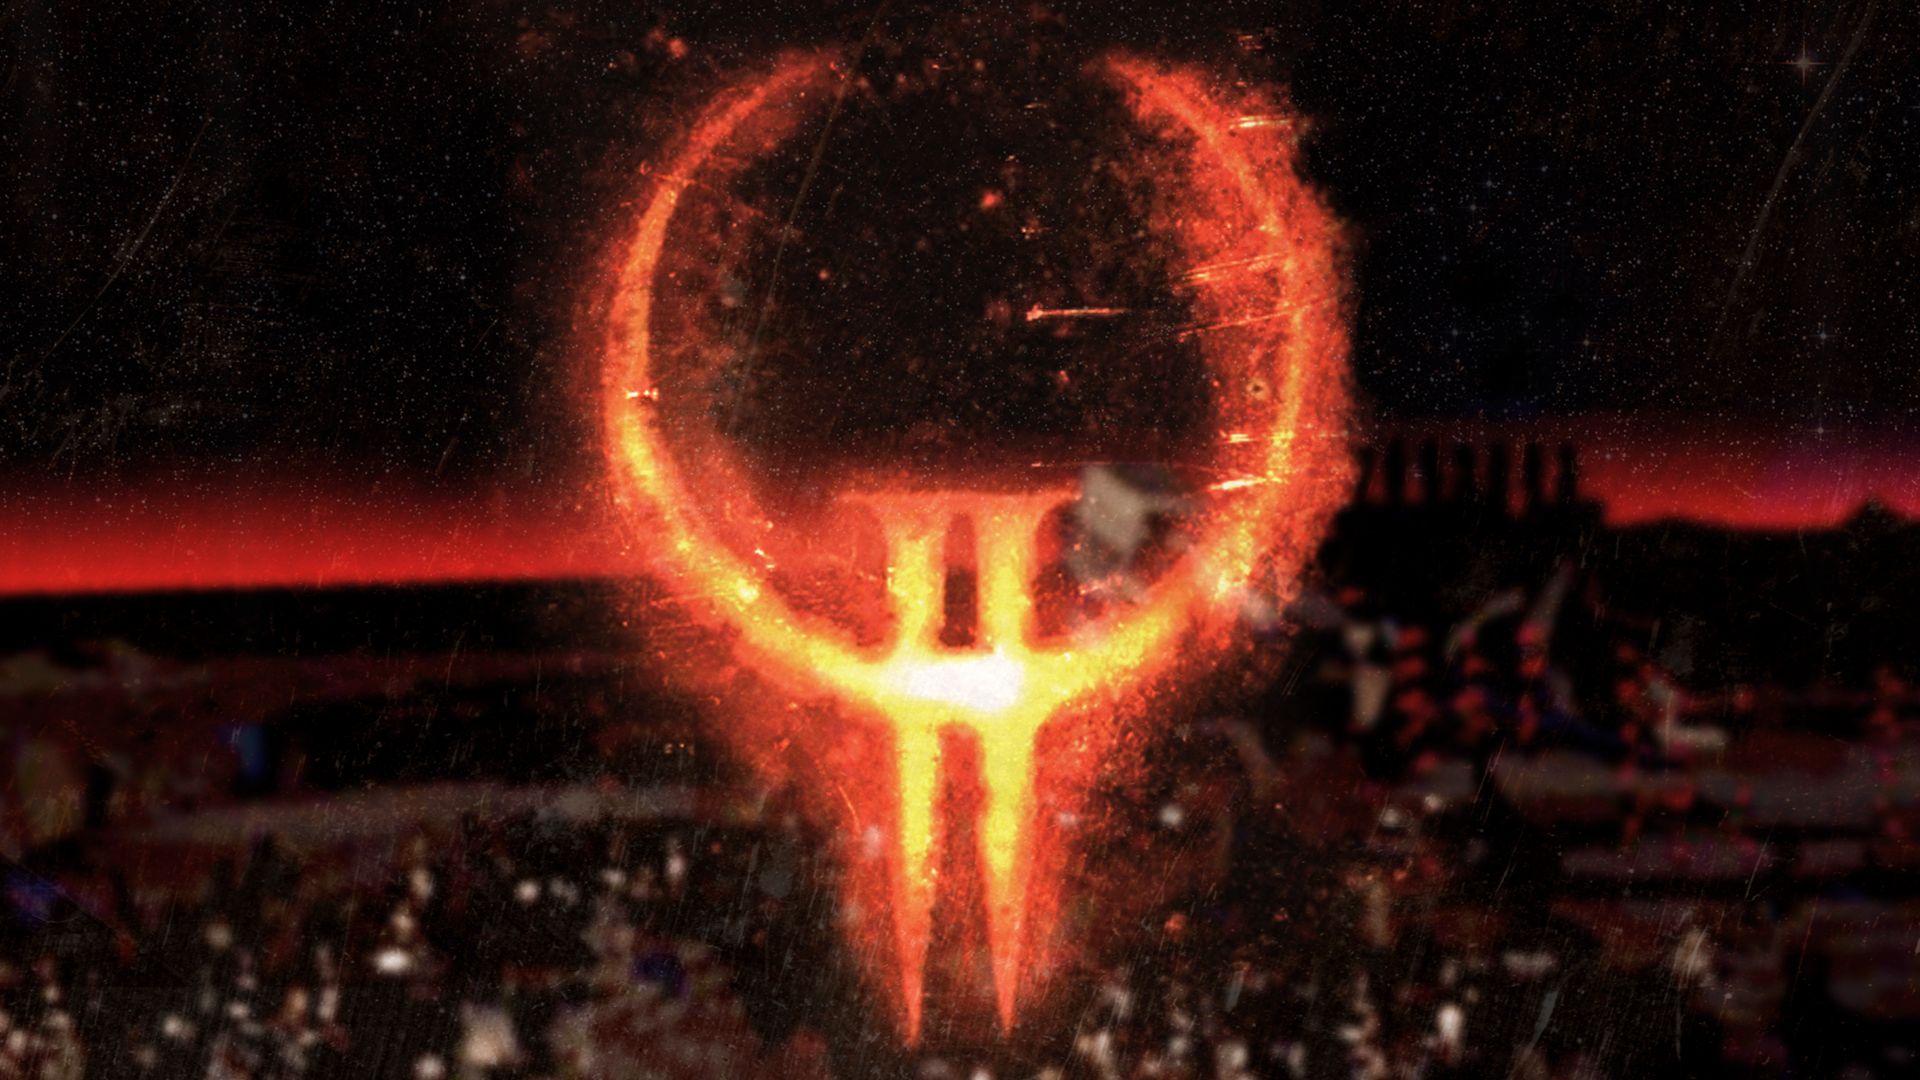 Another Quake wallpaper i made a while ago (1080p)